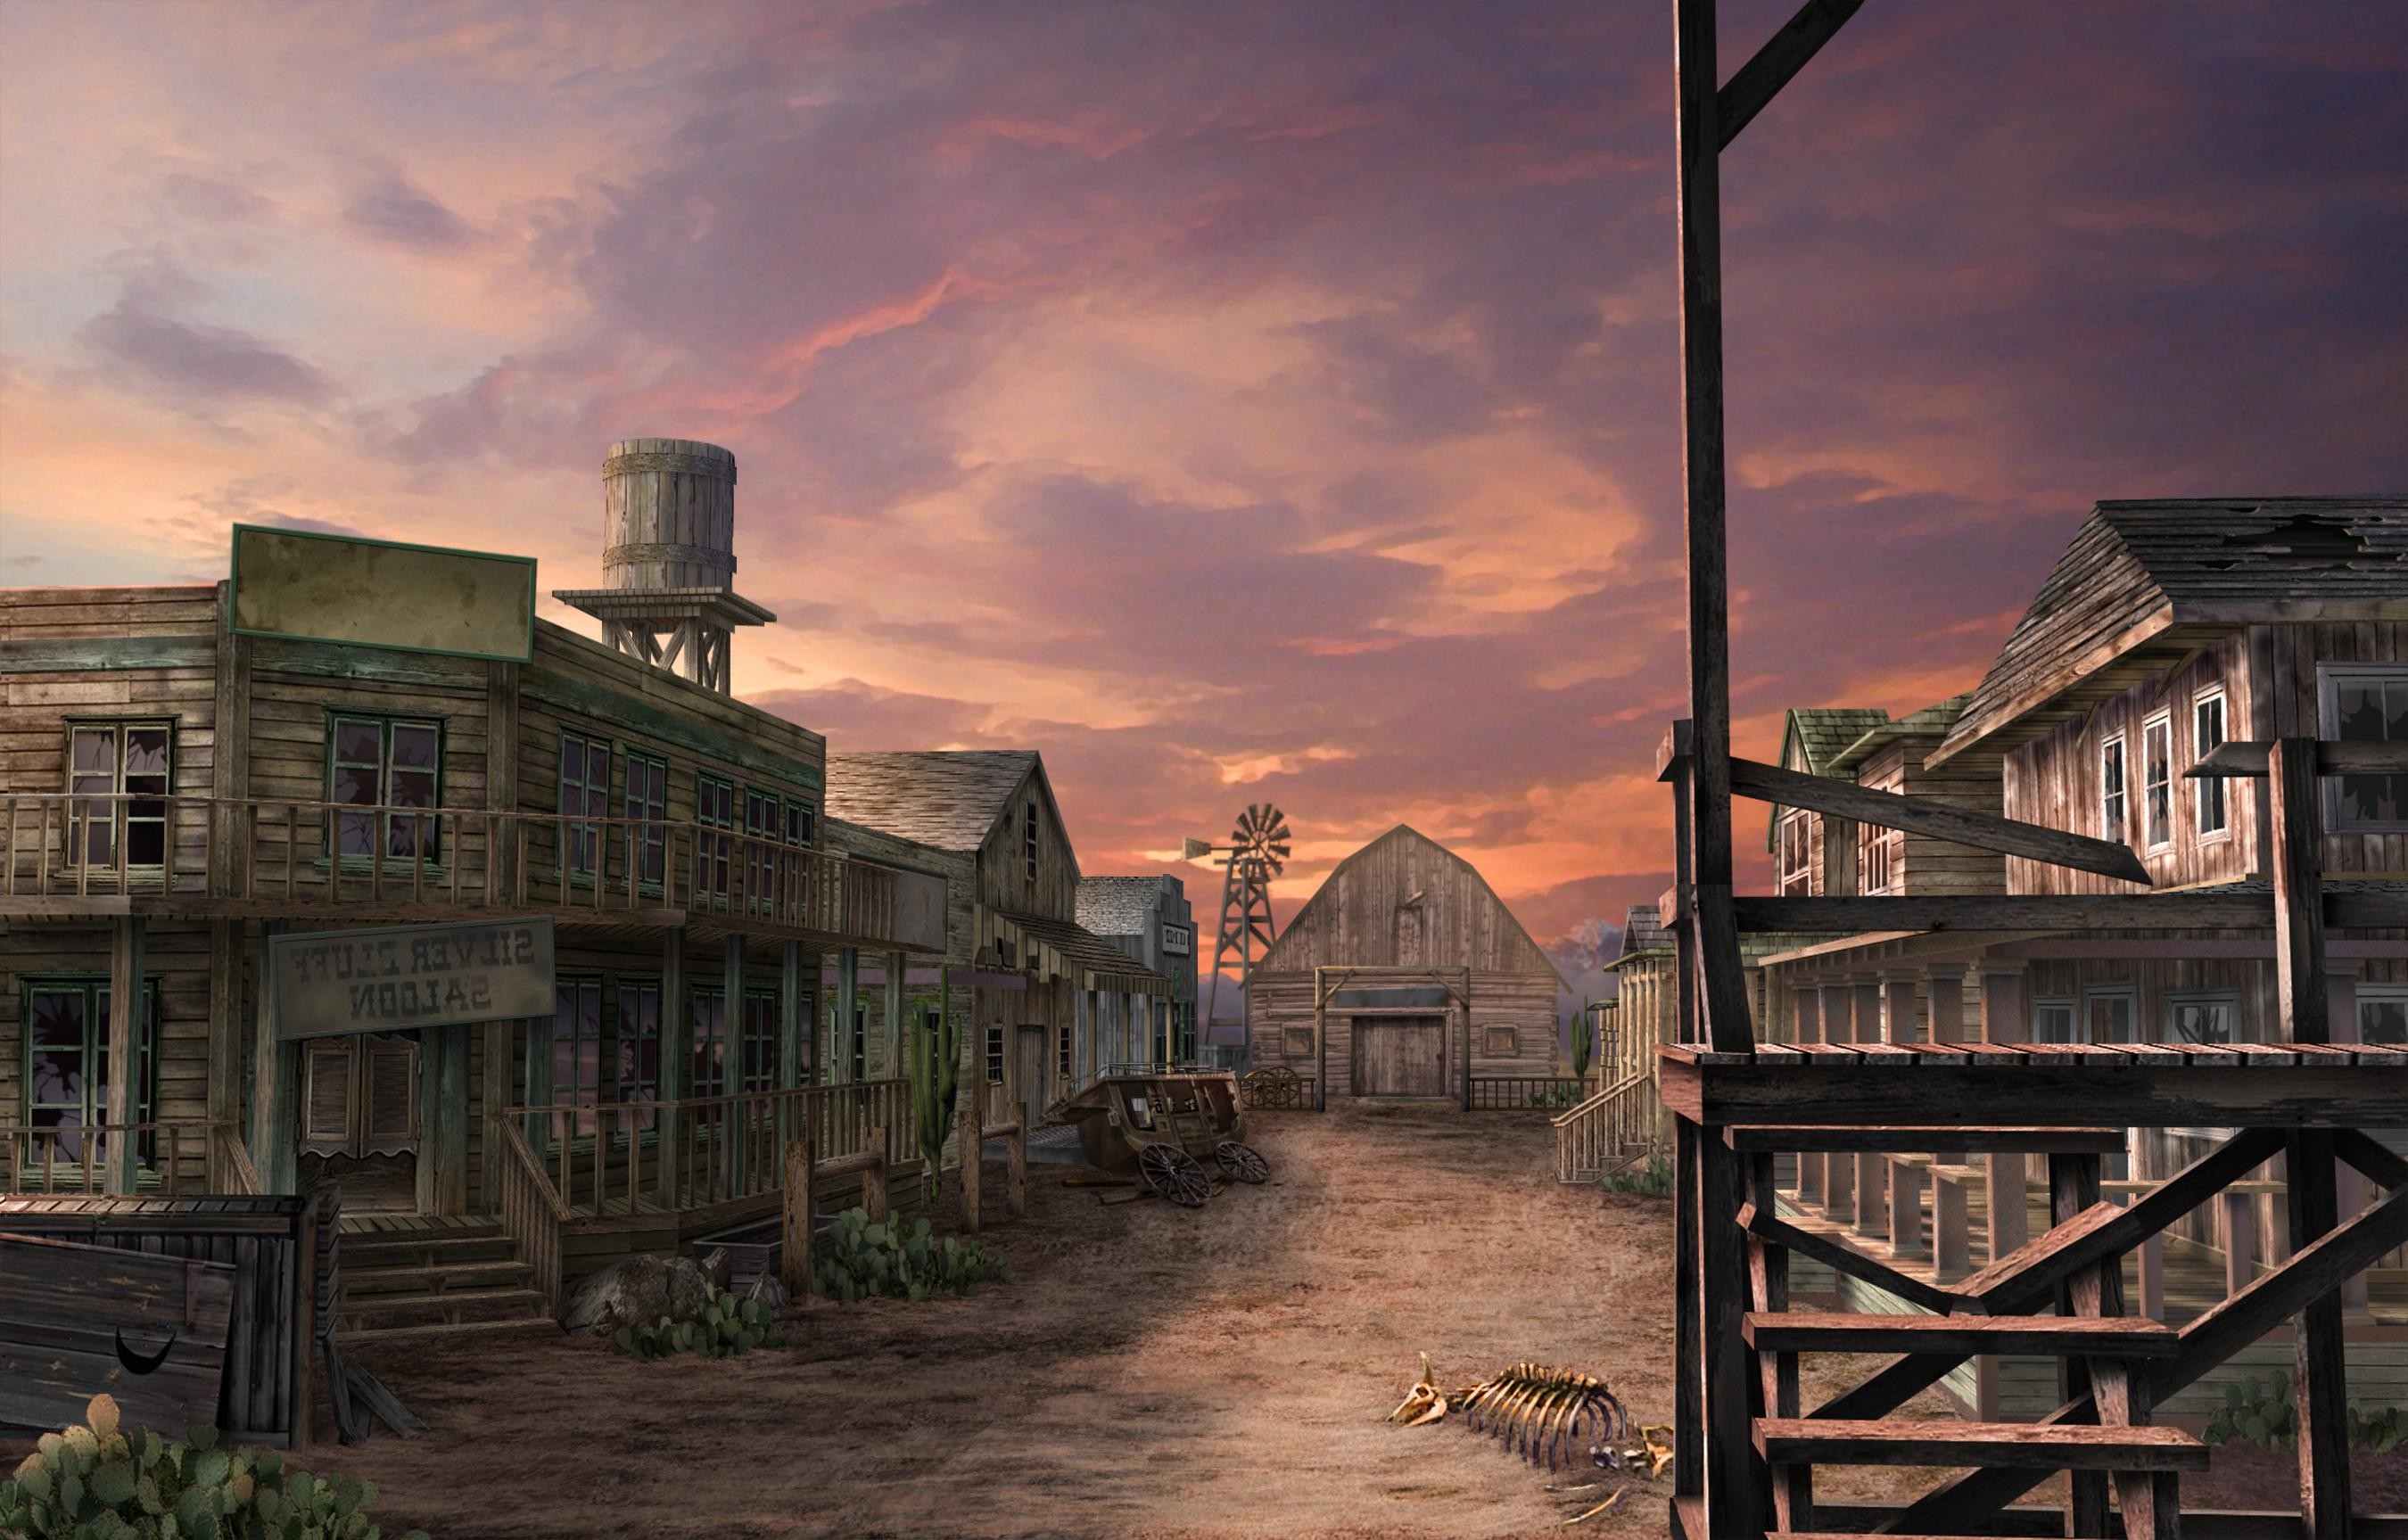 2700x1727 Wild west ghost town sky buildings old - Wallpapers, HD and HQ backgrounds  for your widescreen desktop or mobile device.